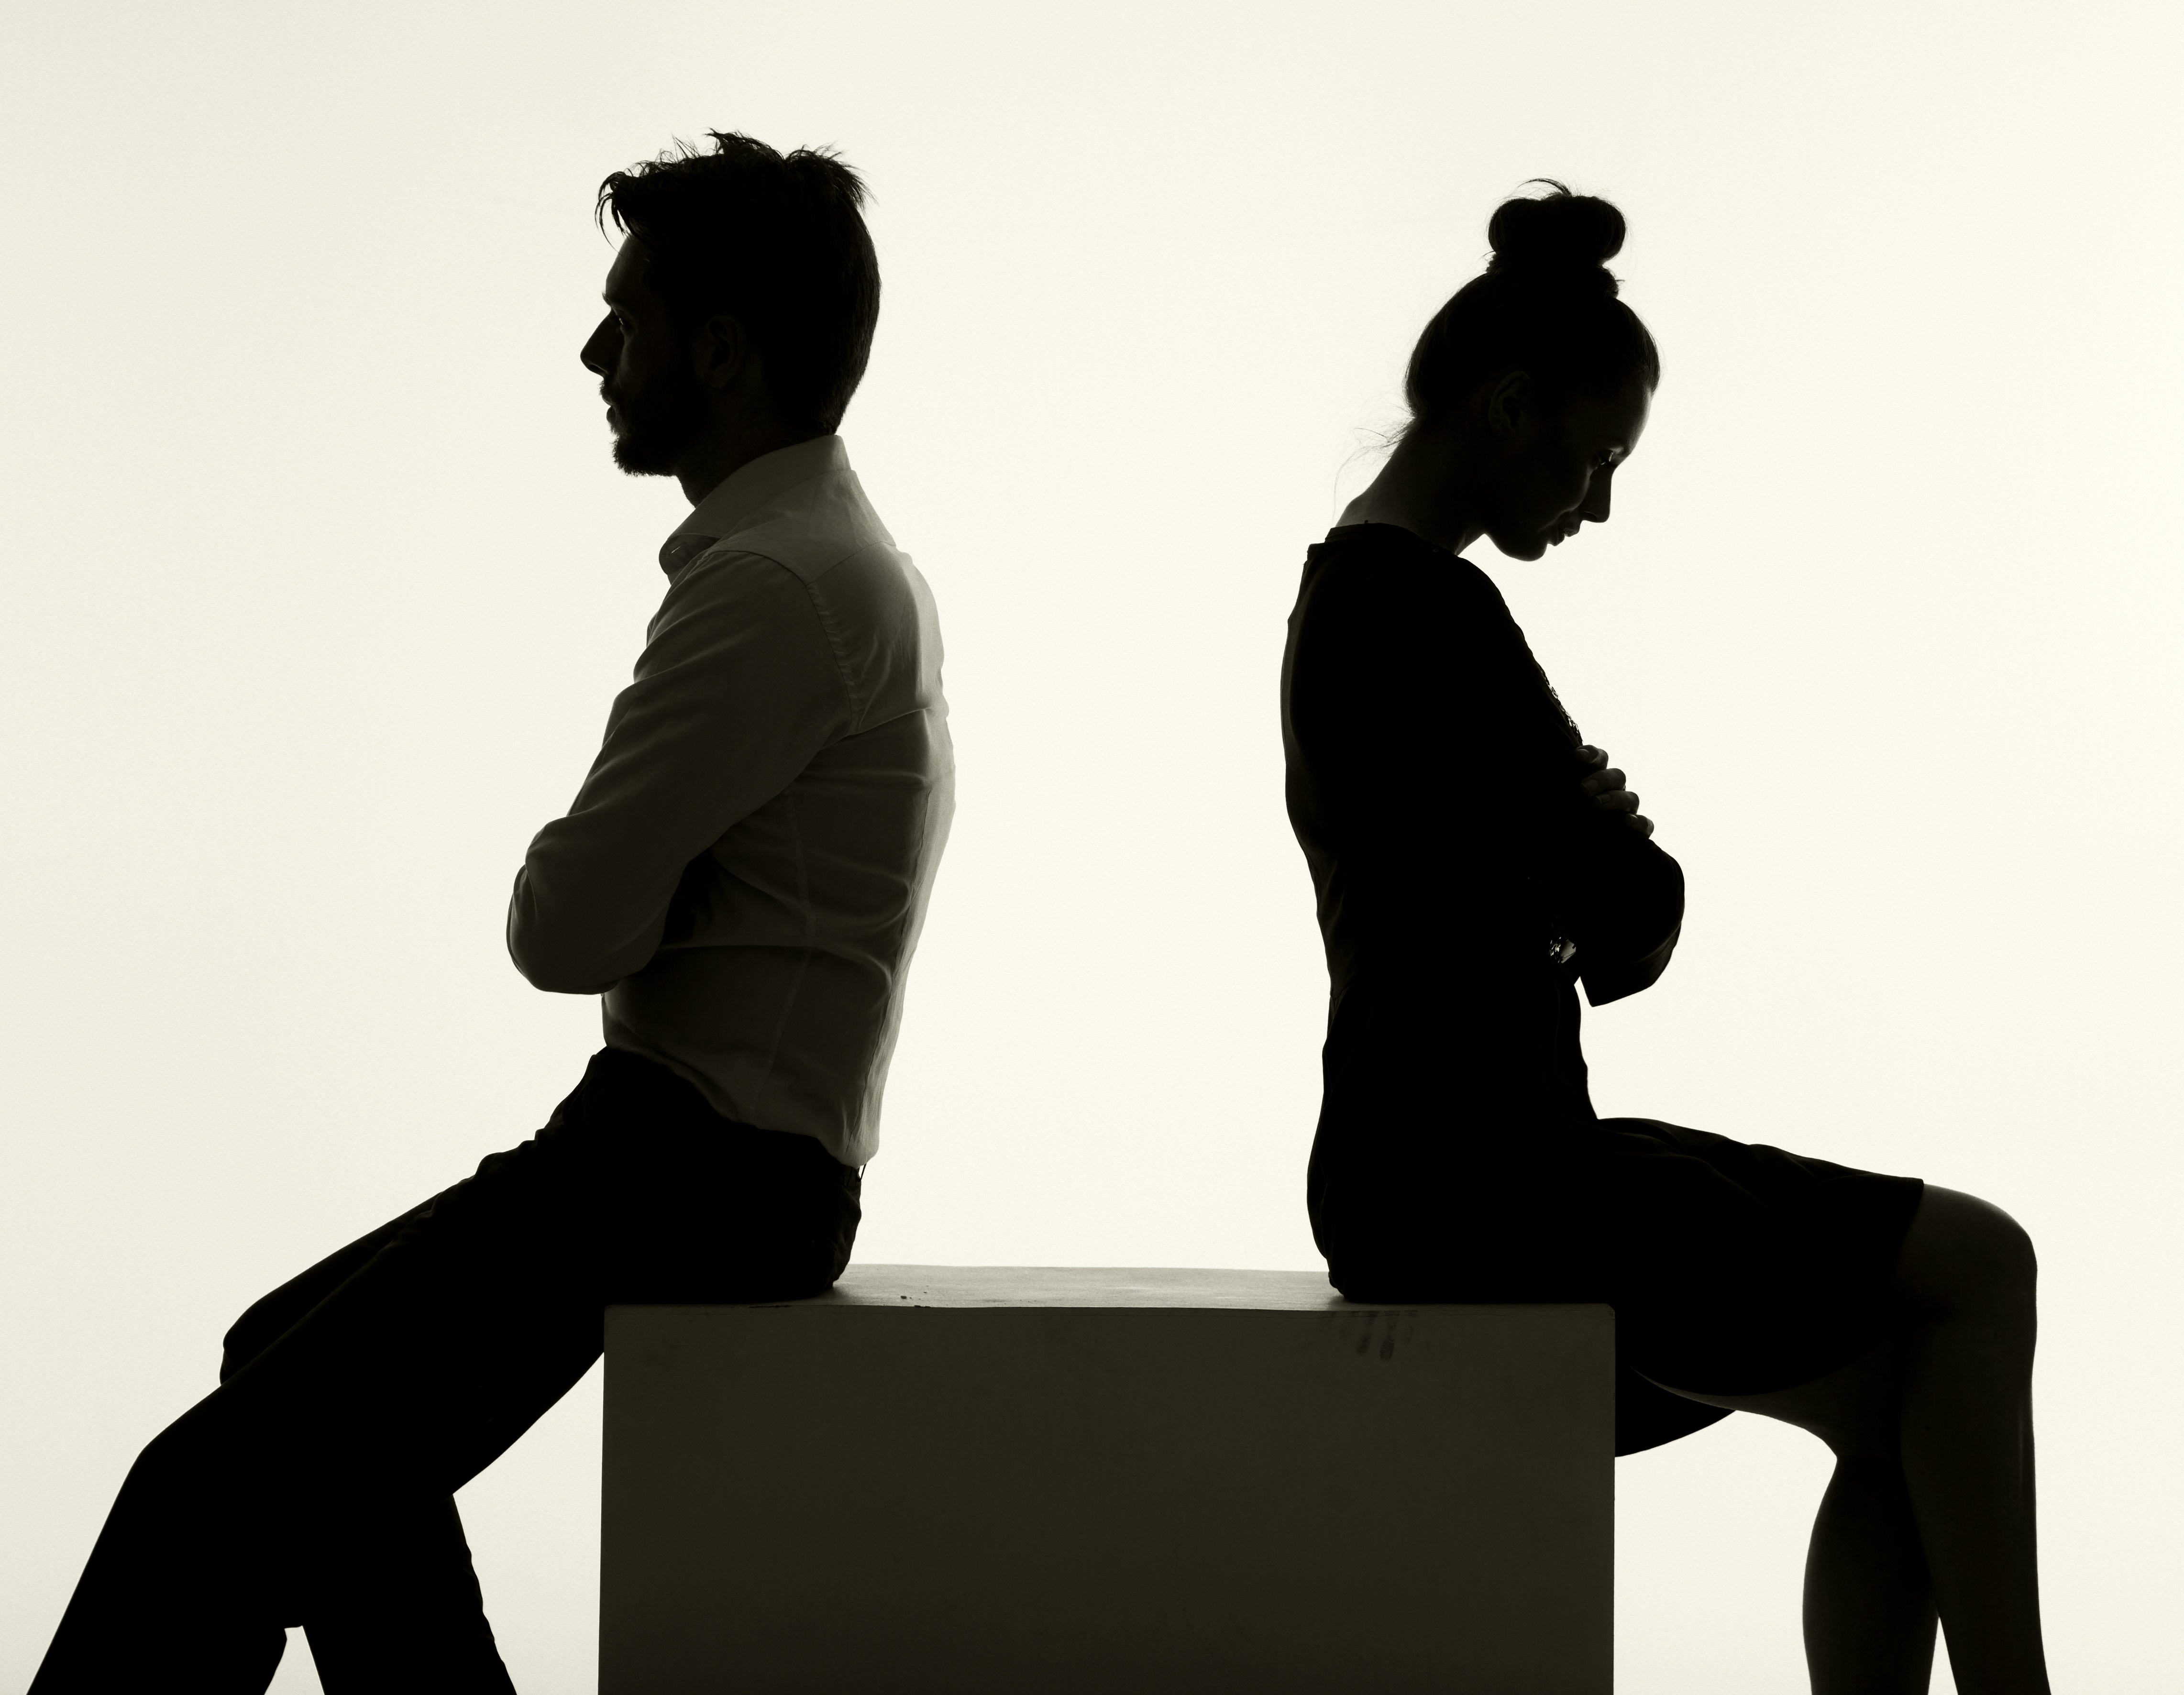 How Can a Divorce be "Collaborative"?